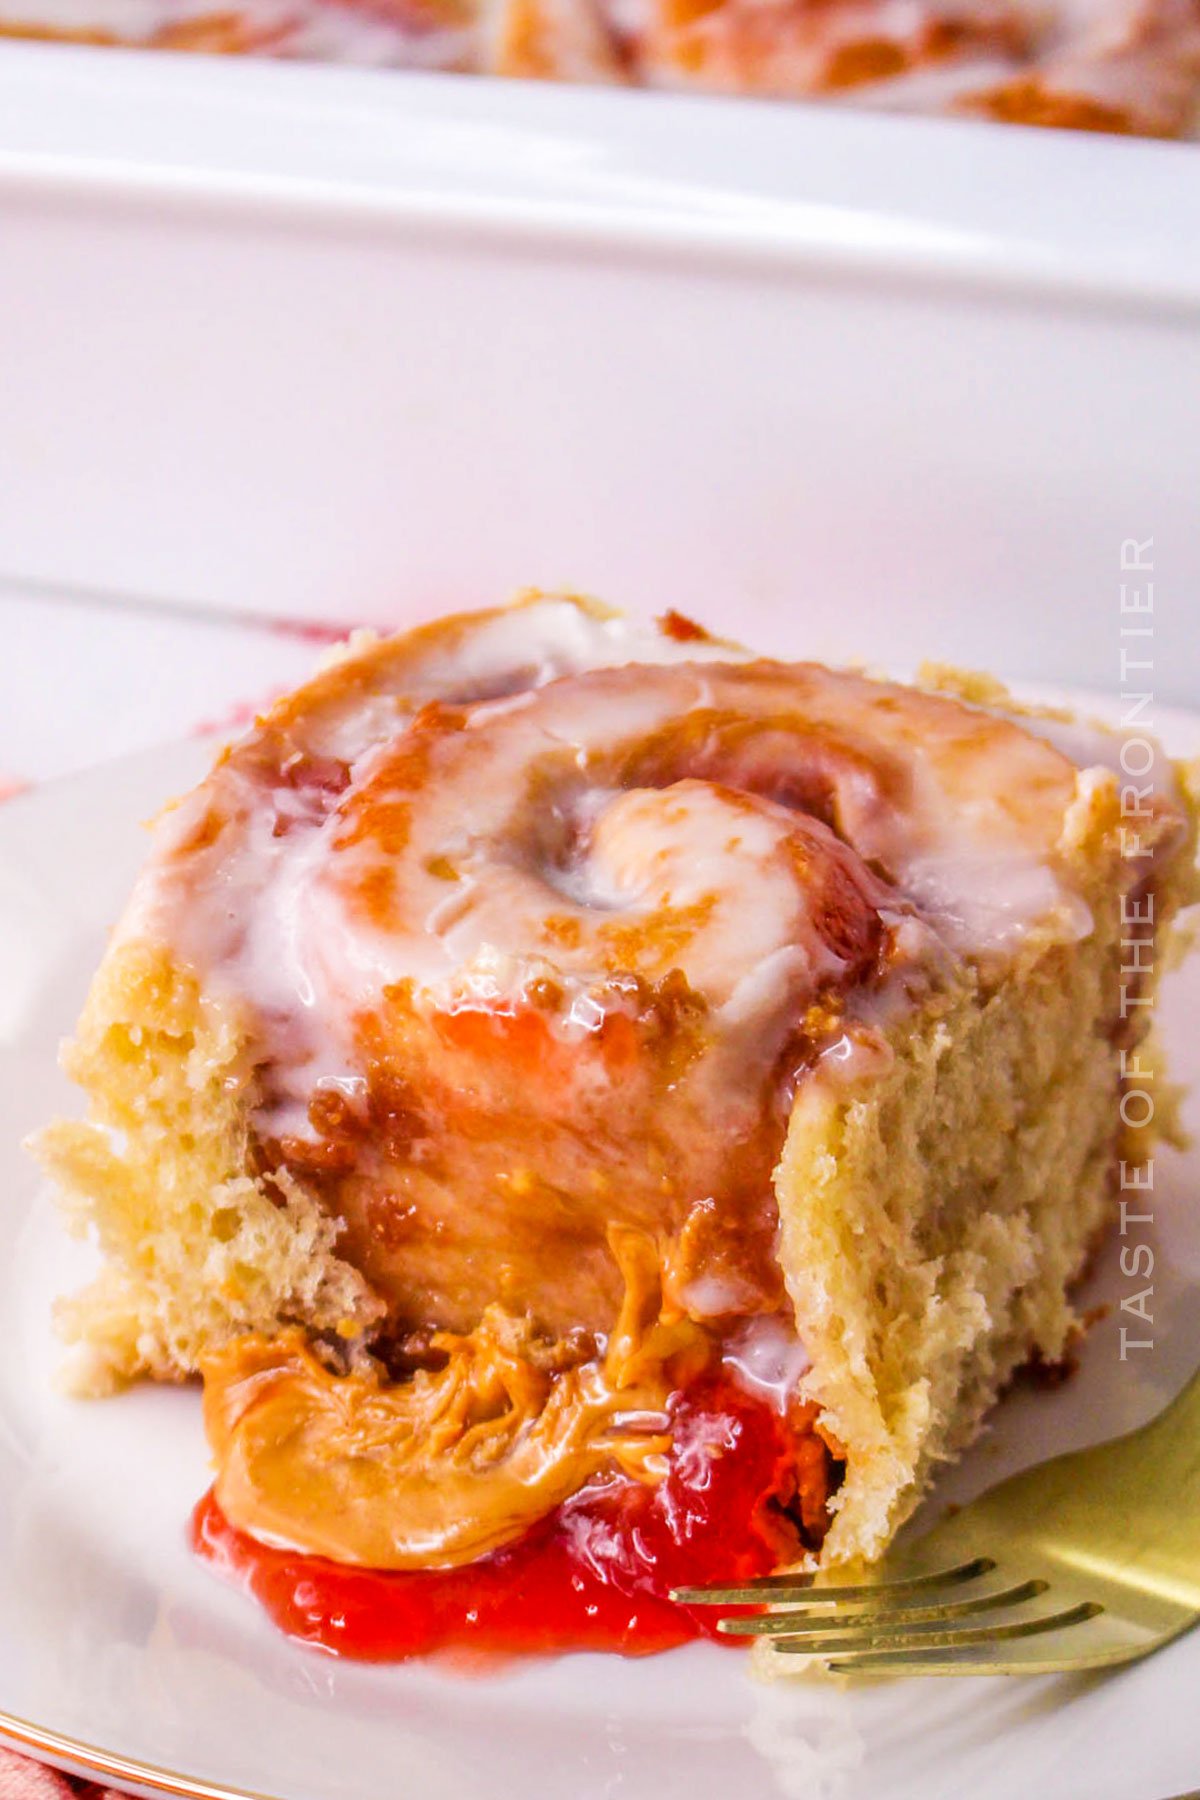 Peanut Butter Cinnamon Rolls with Jelly